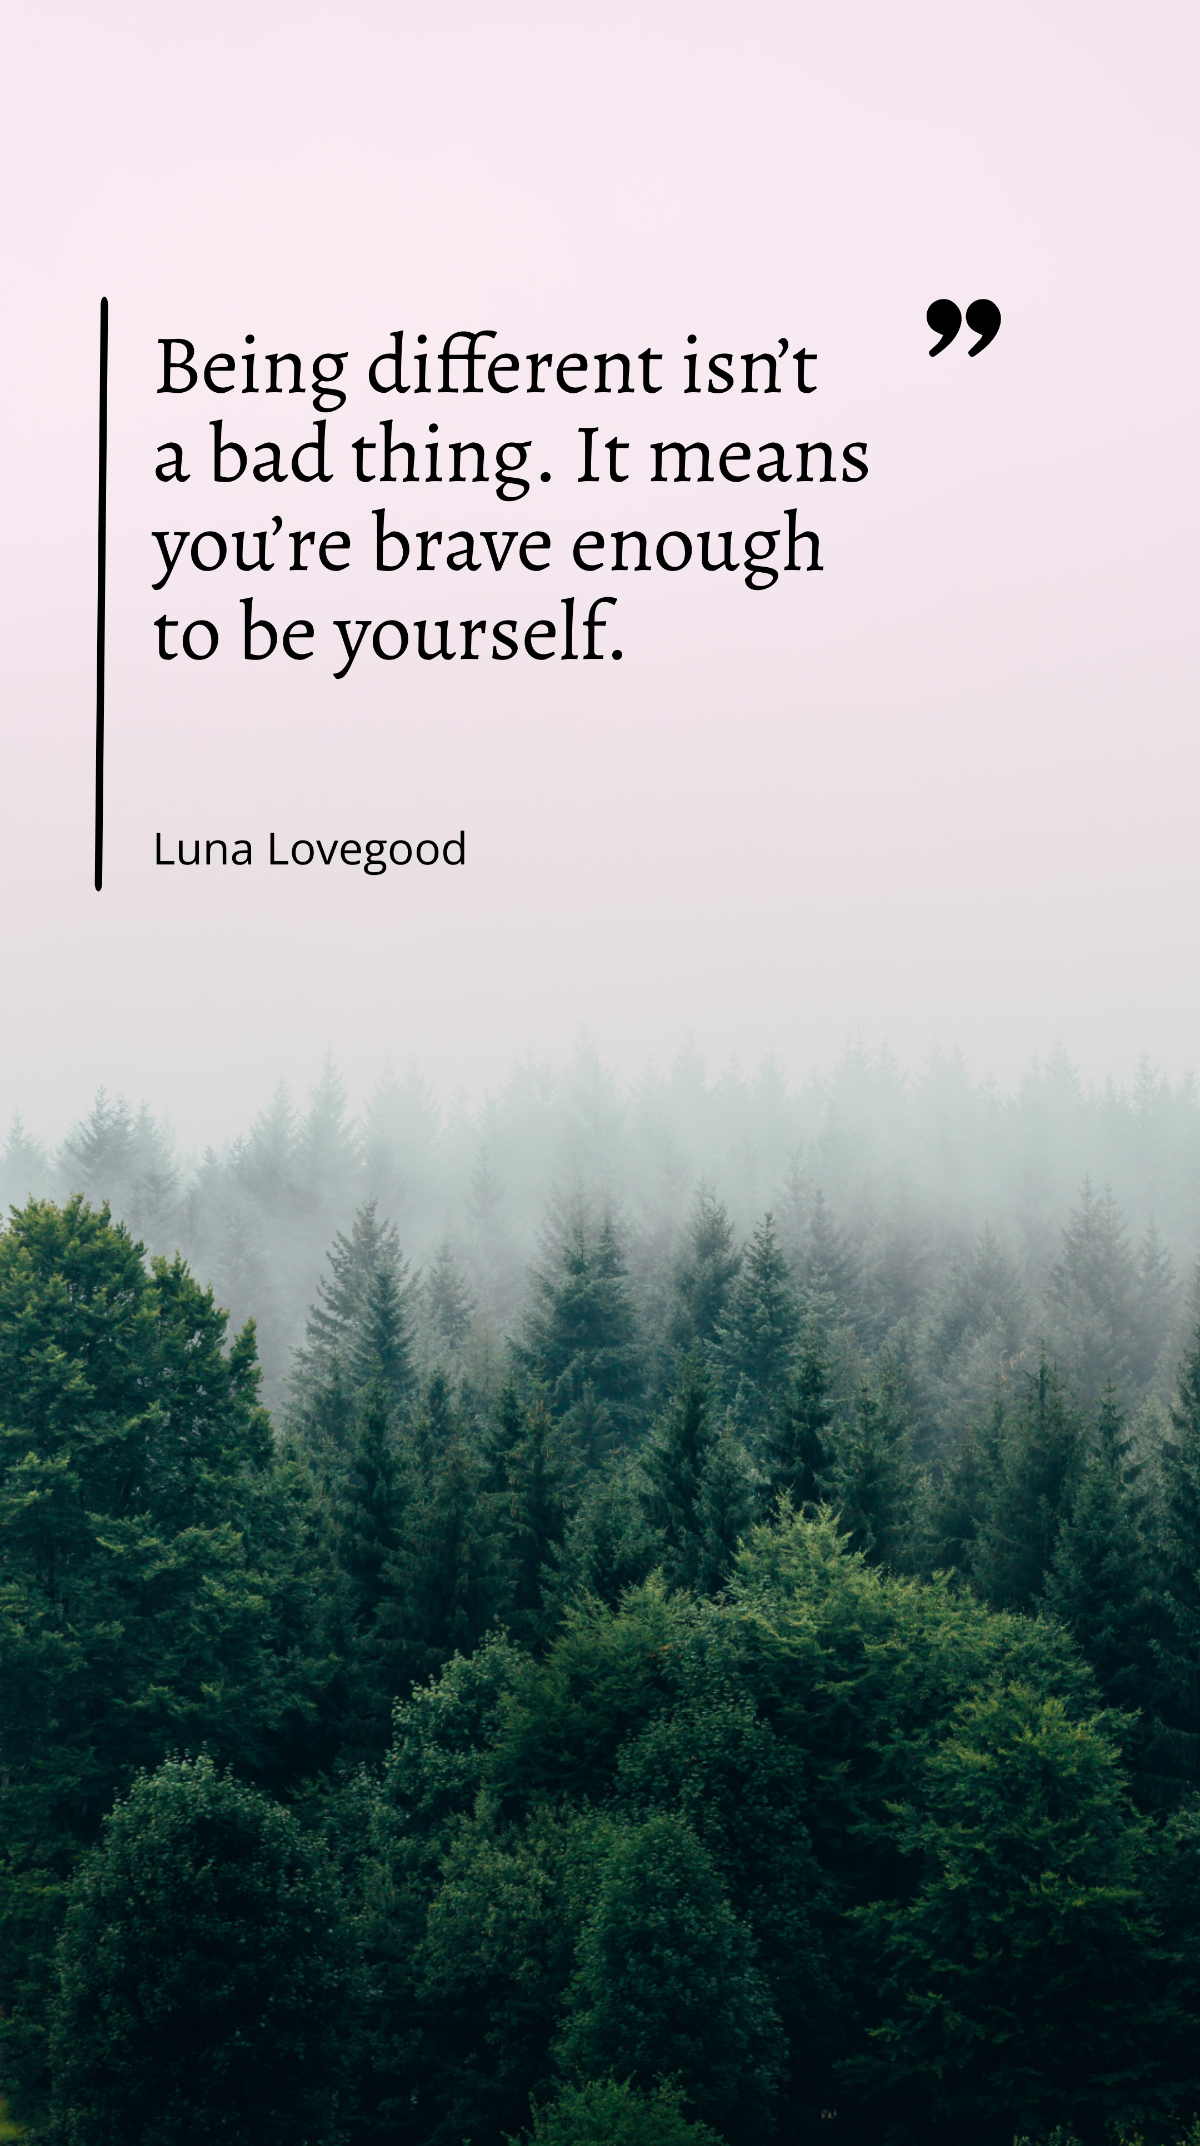 Luna Lovegood - “Being different isn’t a bad thing. It means you’re brave enough to be yourself.” Template